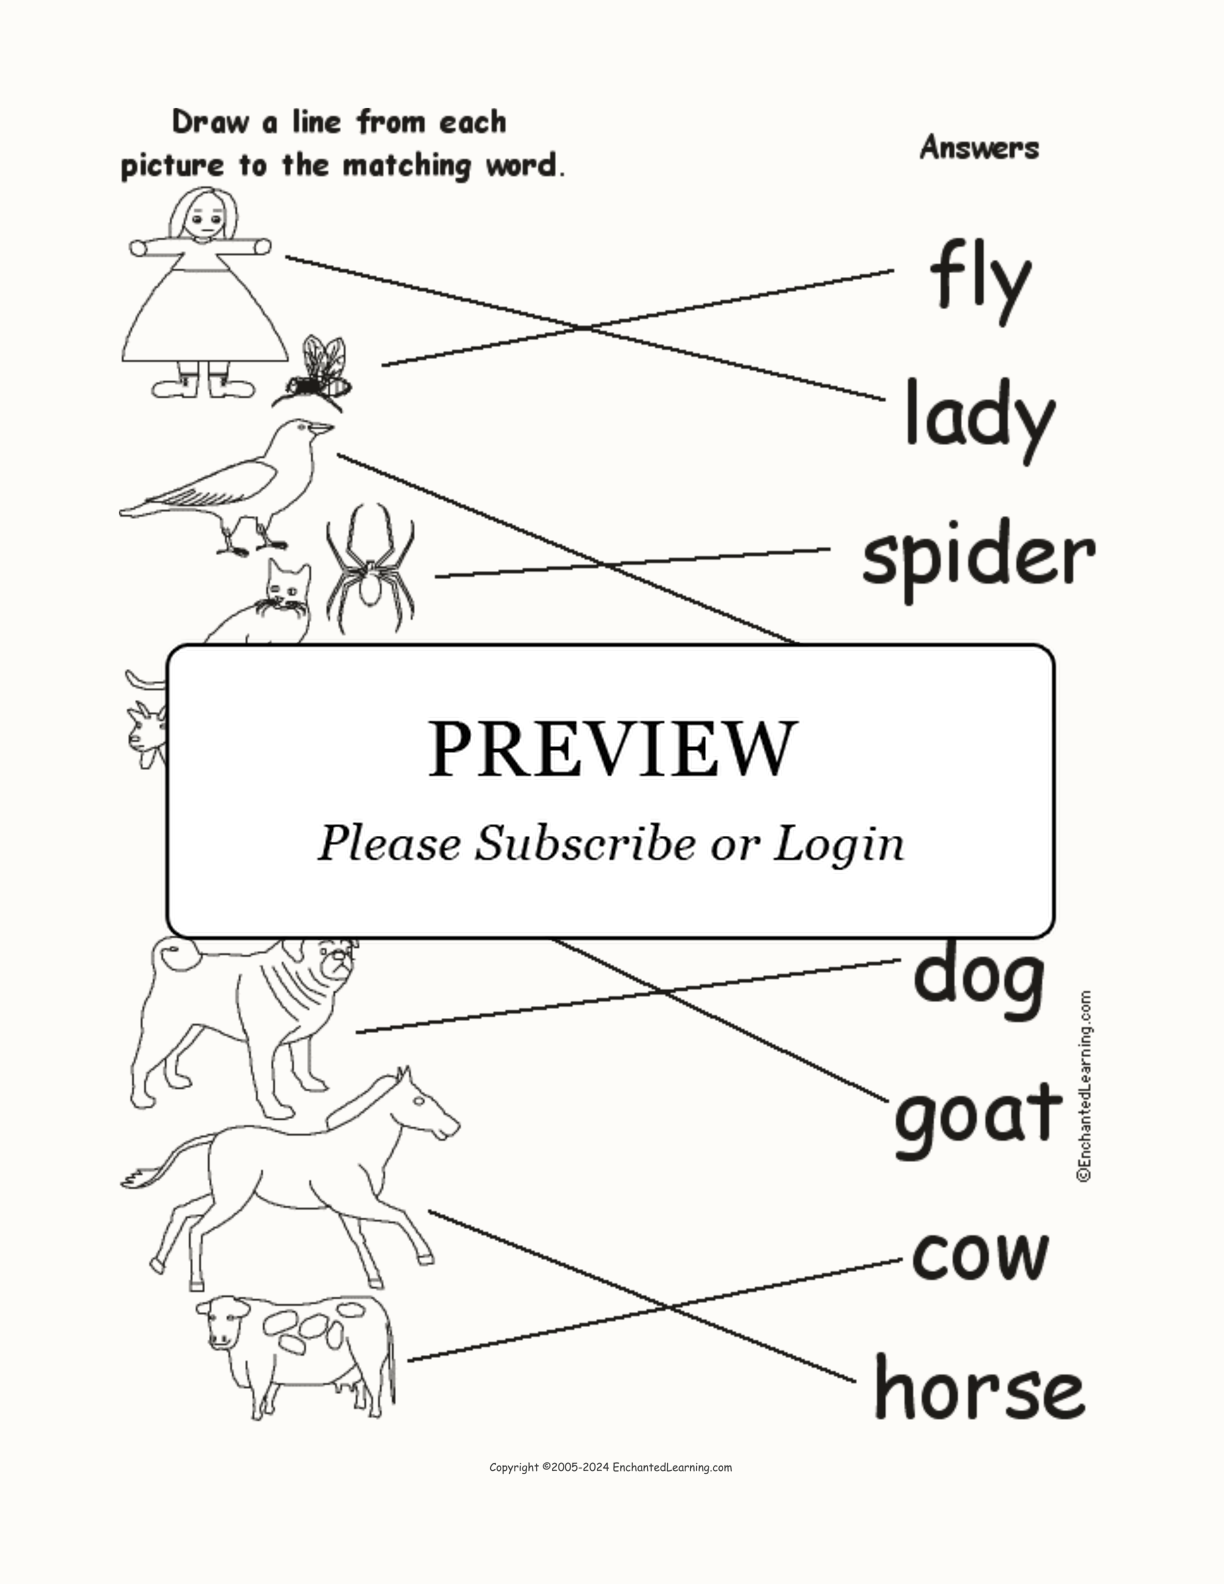 Match 'The Old Lady and the Fly' Words to the Pictures interactive worksheet page 2